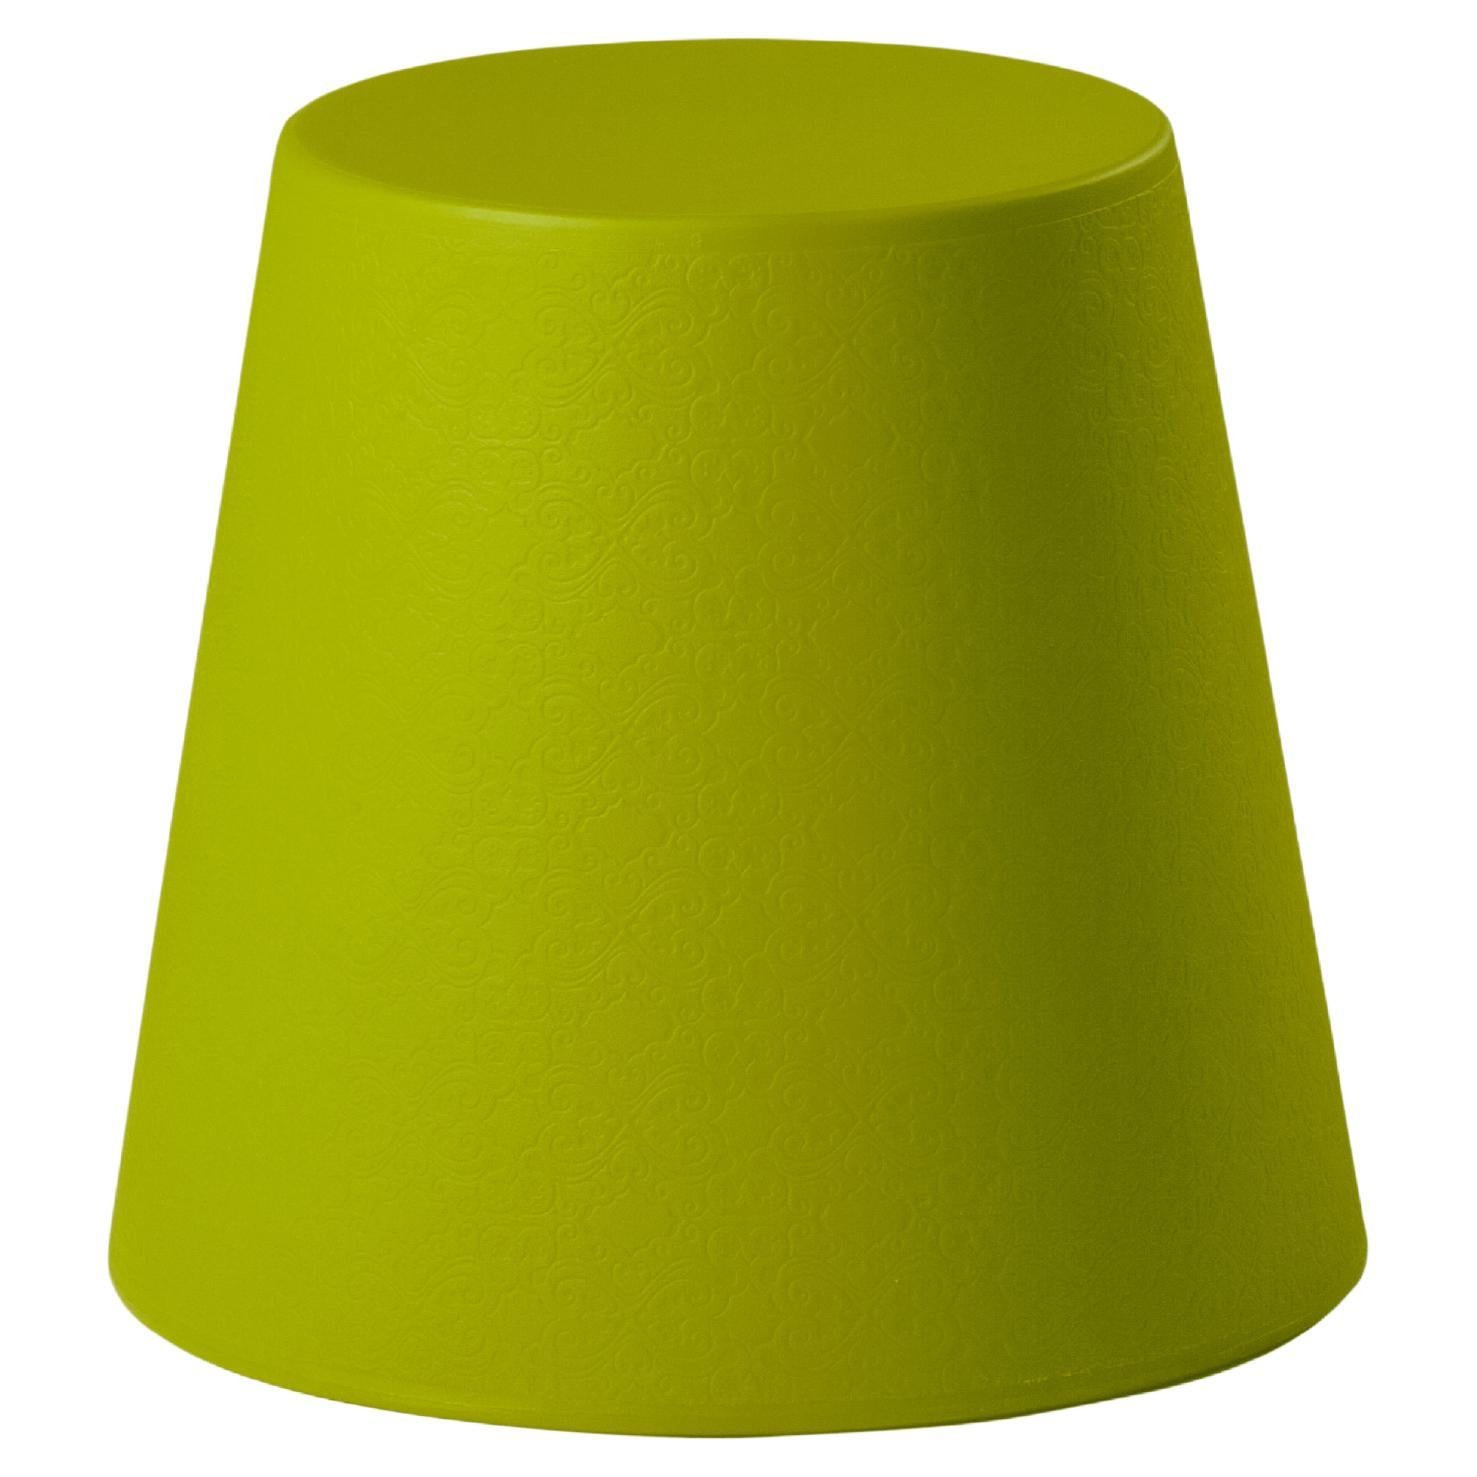 Slide Design Ali Baba Stool in Lime Green by Giò Colonna Romano For Sale